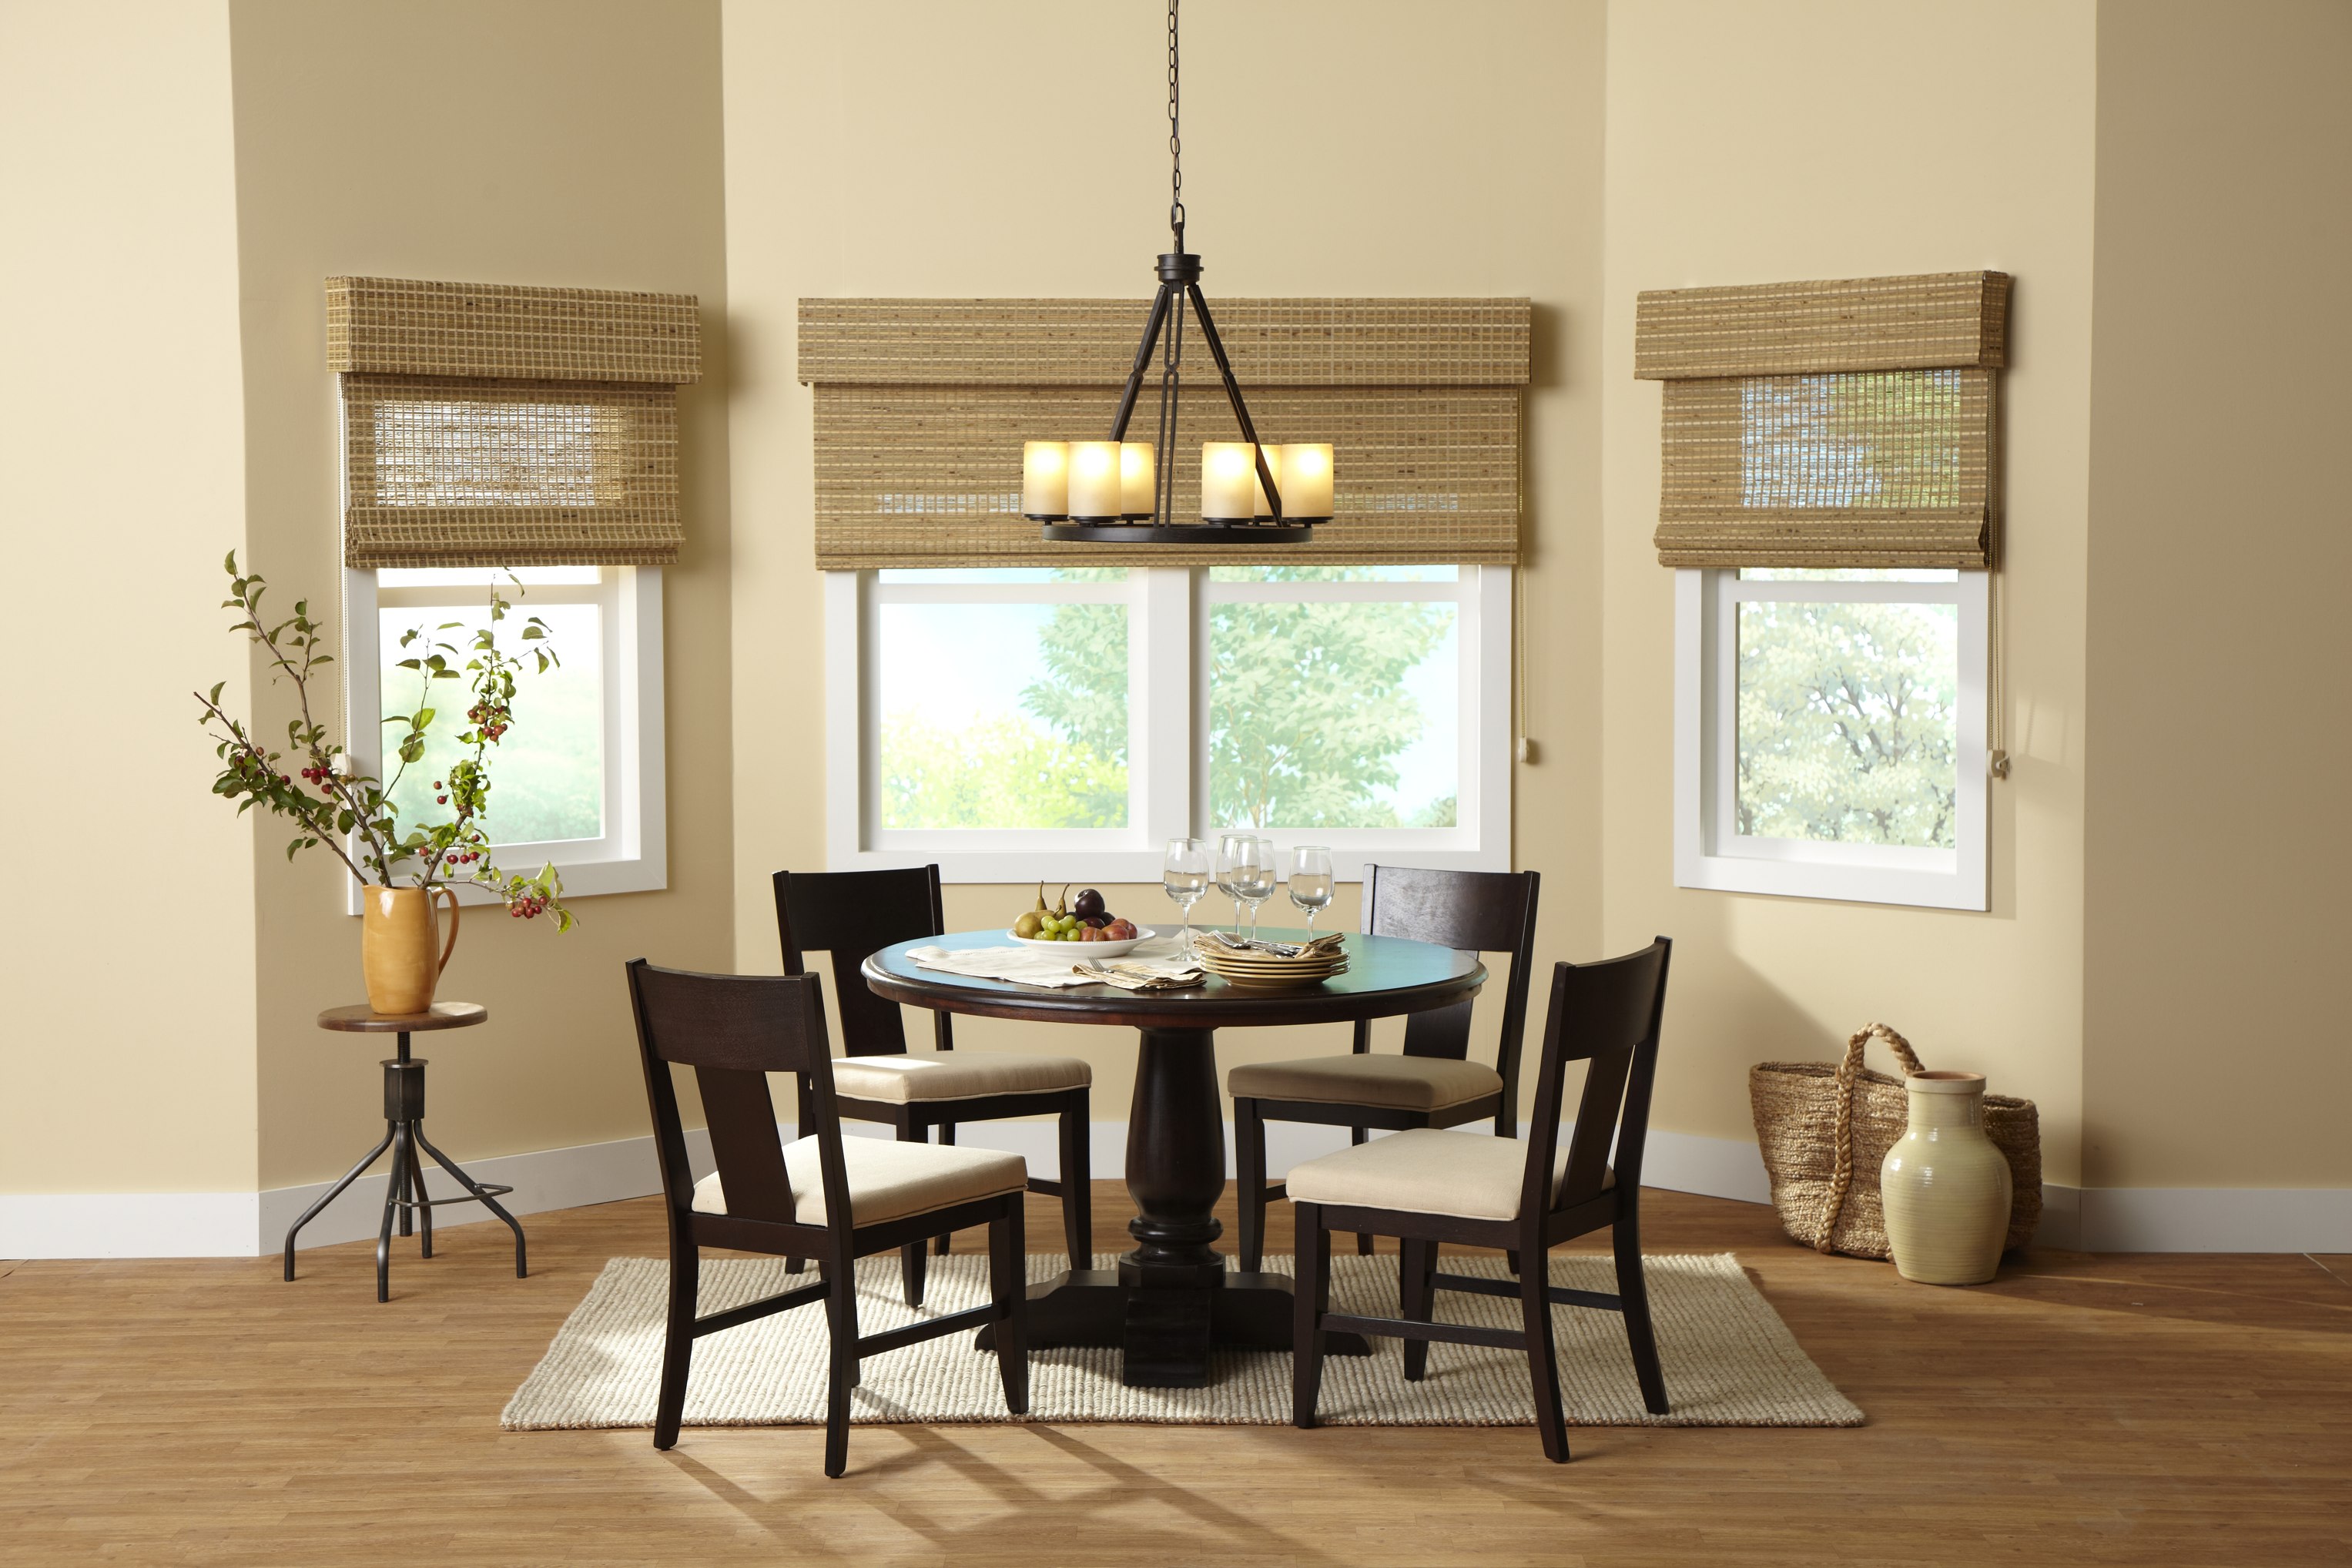 Woven Wood Blinds In Dining Room